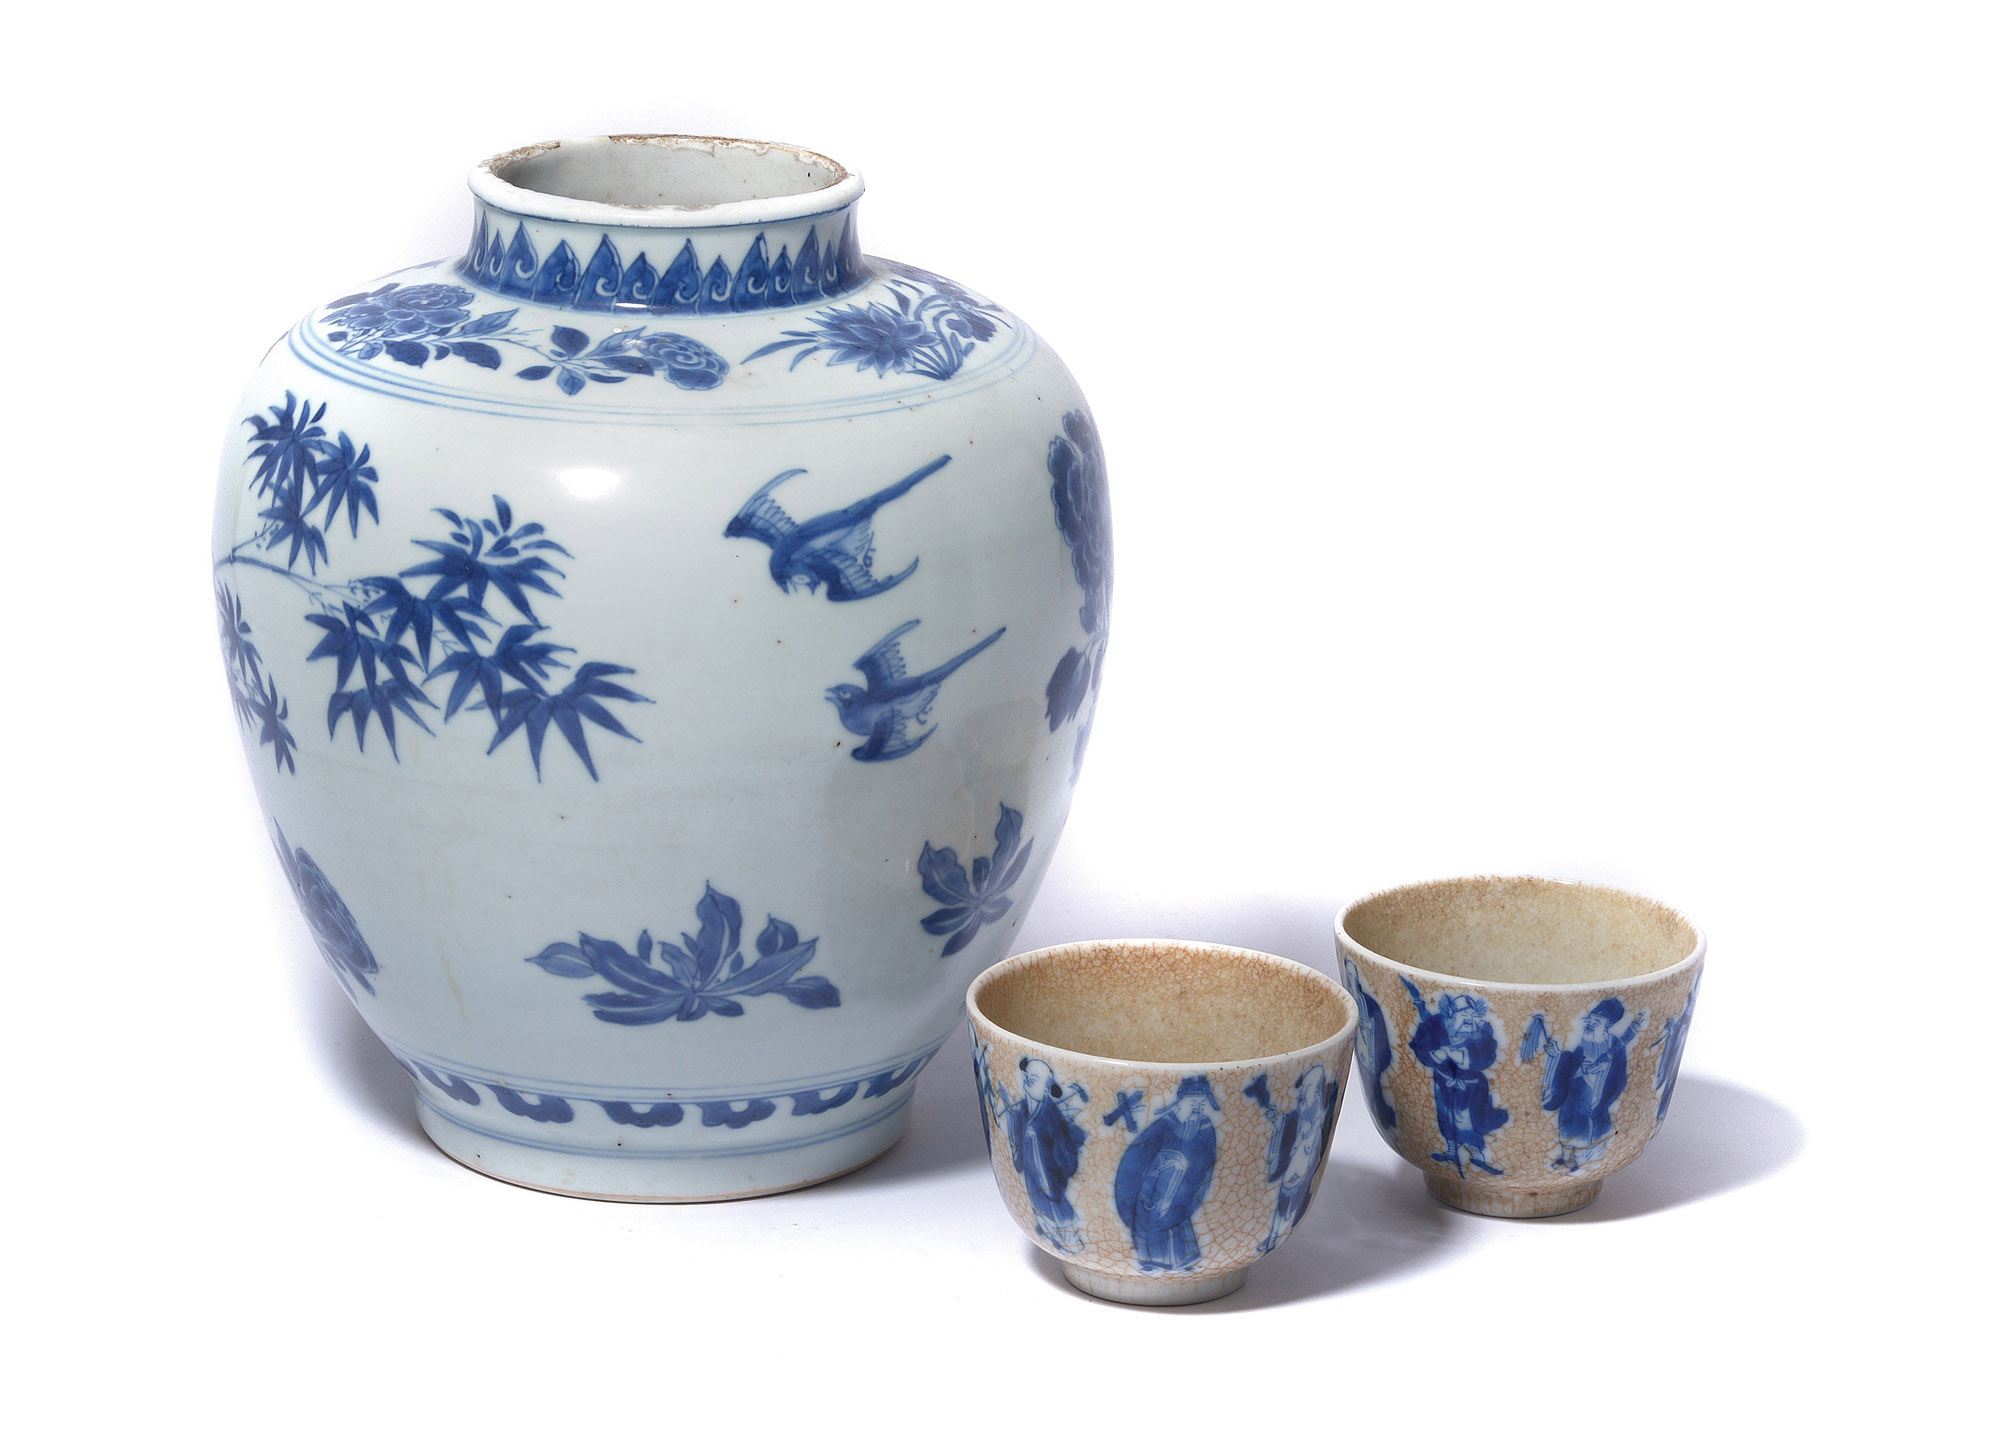 These underglaze blue vessels sold for $12,980. Michaan's image